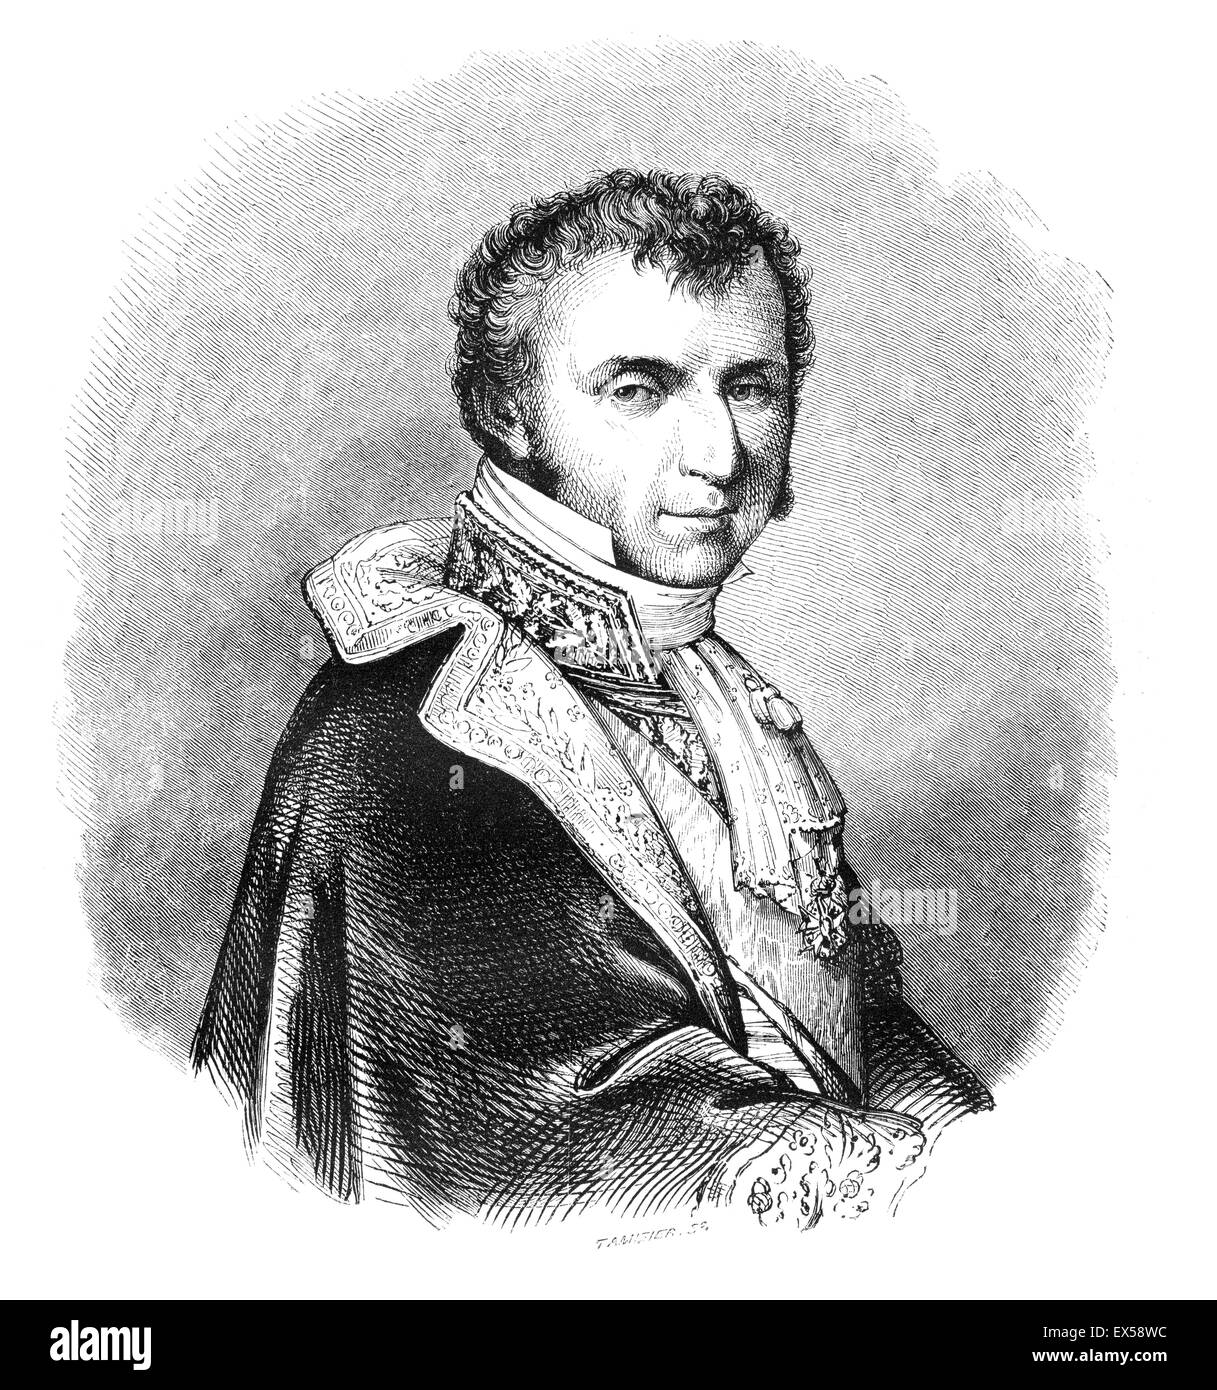 Nicolas François, Count Mollien (1758-850), French financier, was born at Paris. Engraving from Magasin Pittoresqie, 1858. Stock Photo